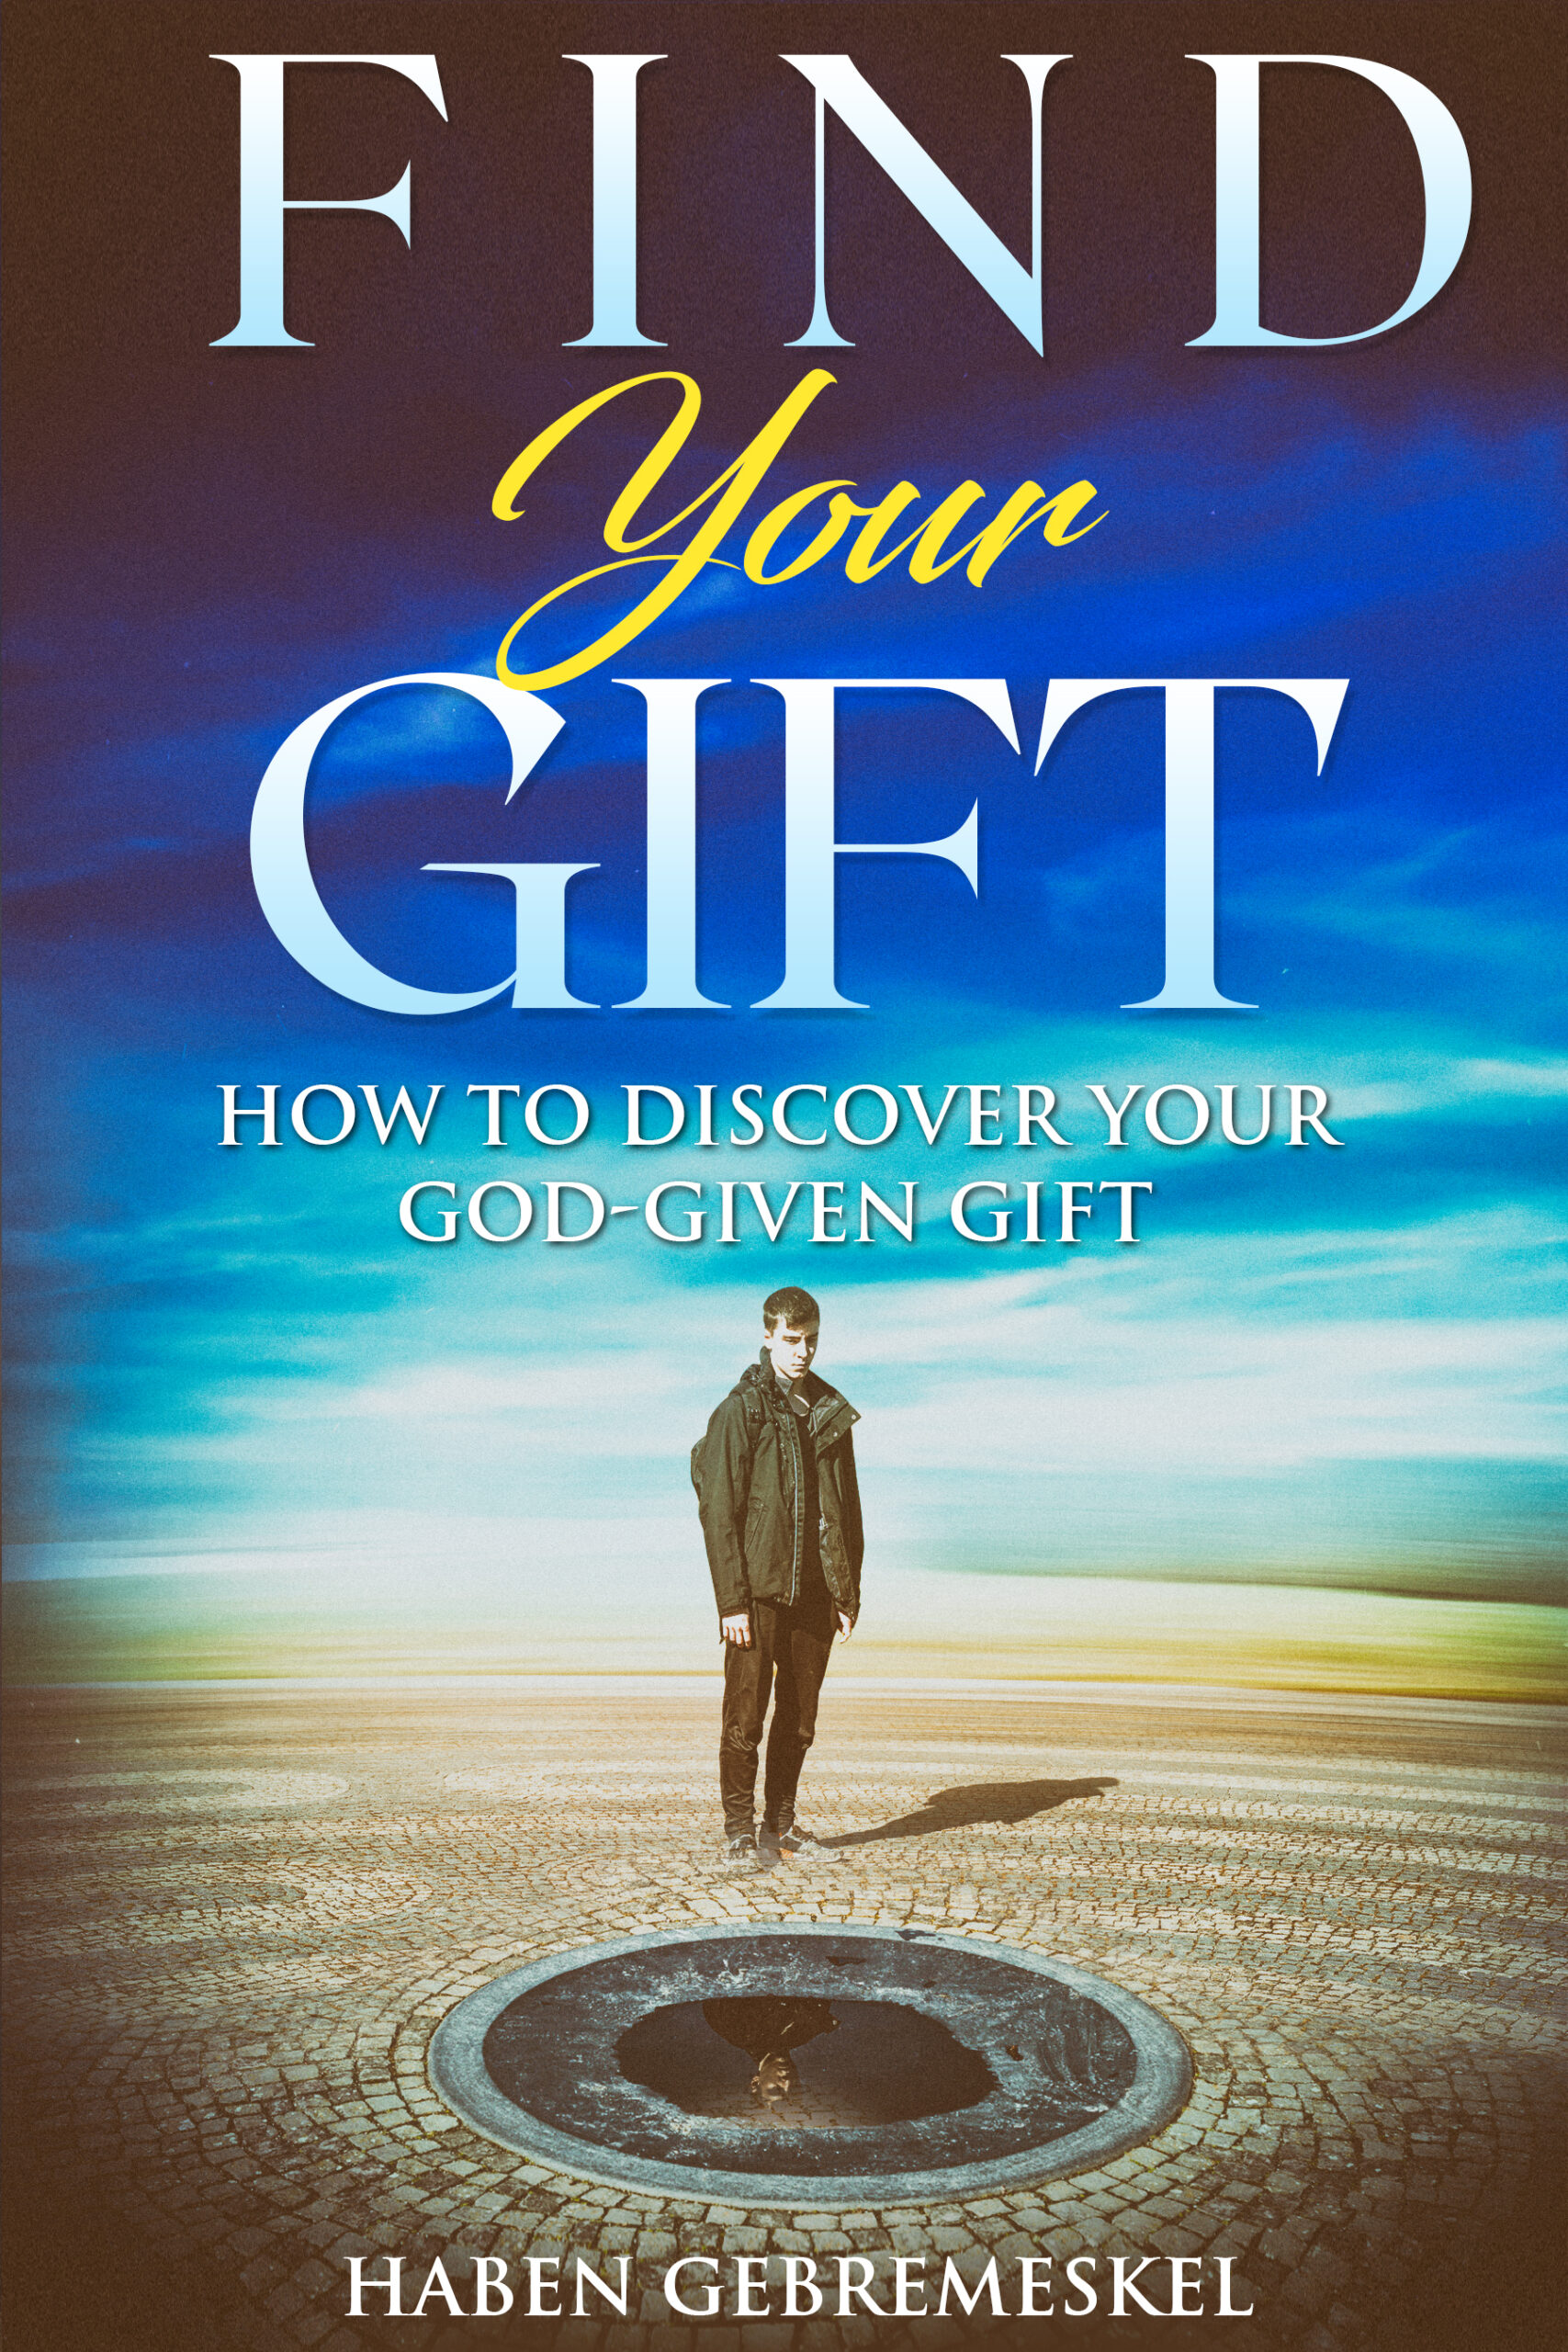 FREE: Find Your Gift: Discover Your God-Given Gift by Haben Gebremeskel